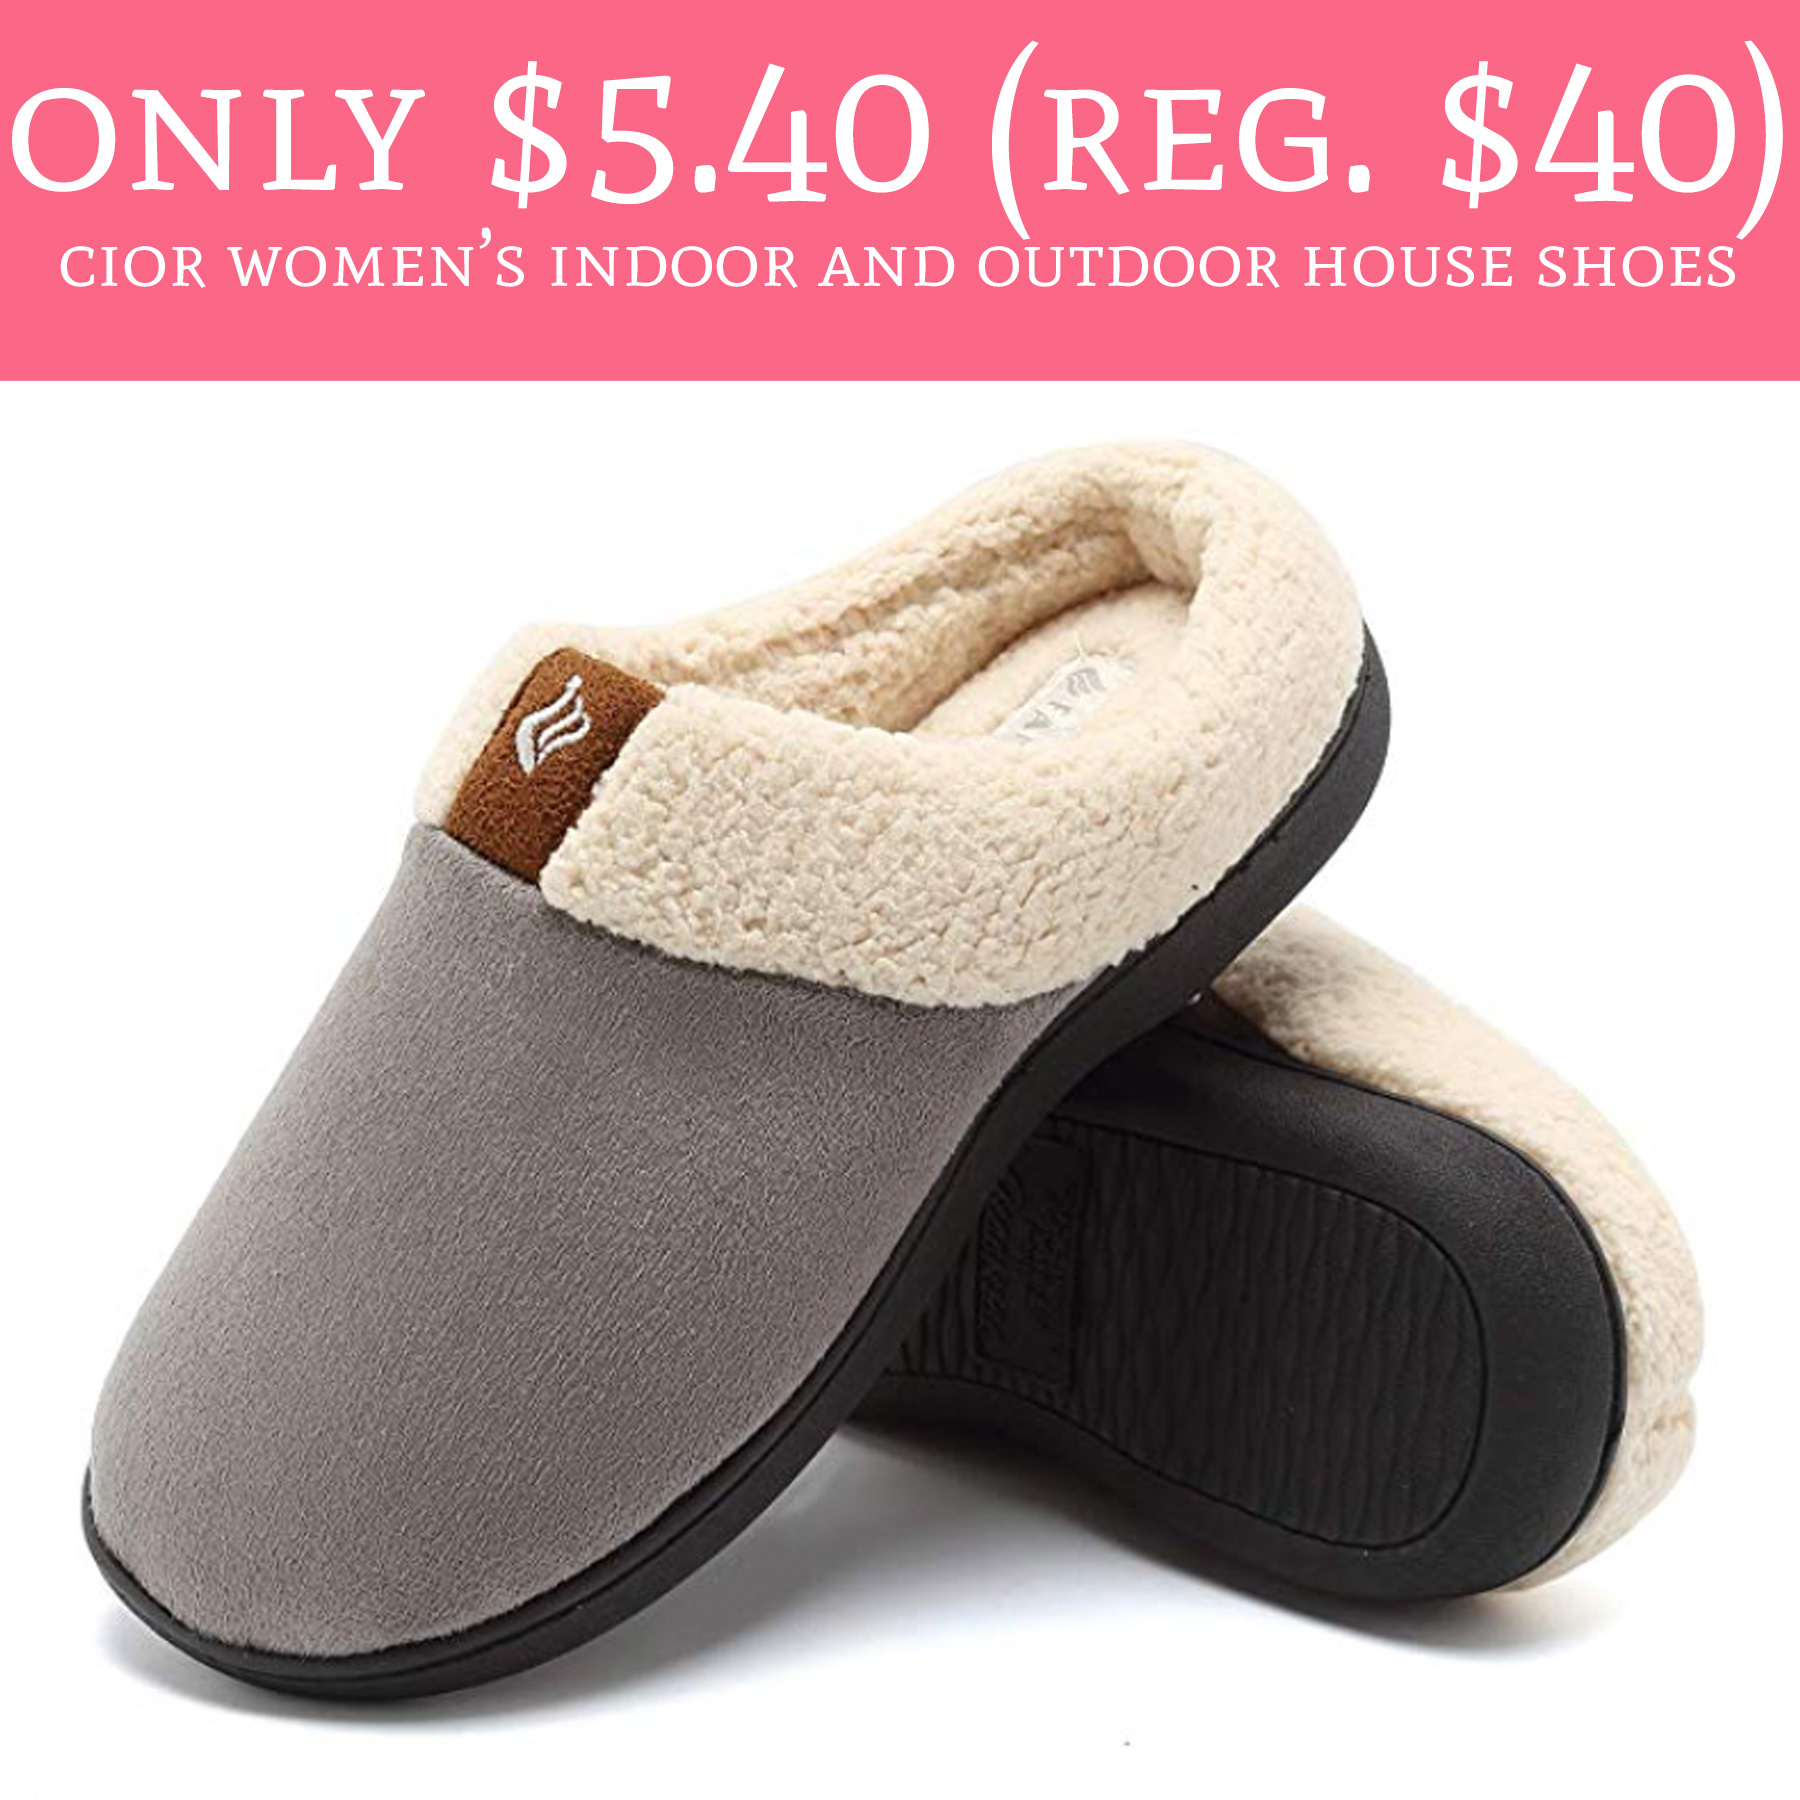 cior-women’s-indoor-and-outdoor-house-shoes